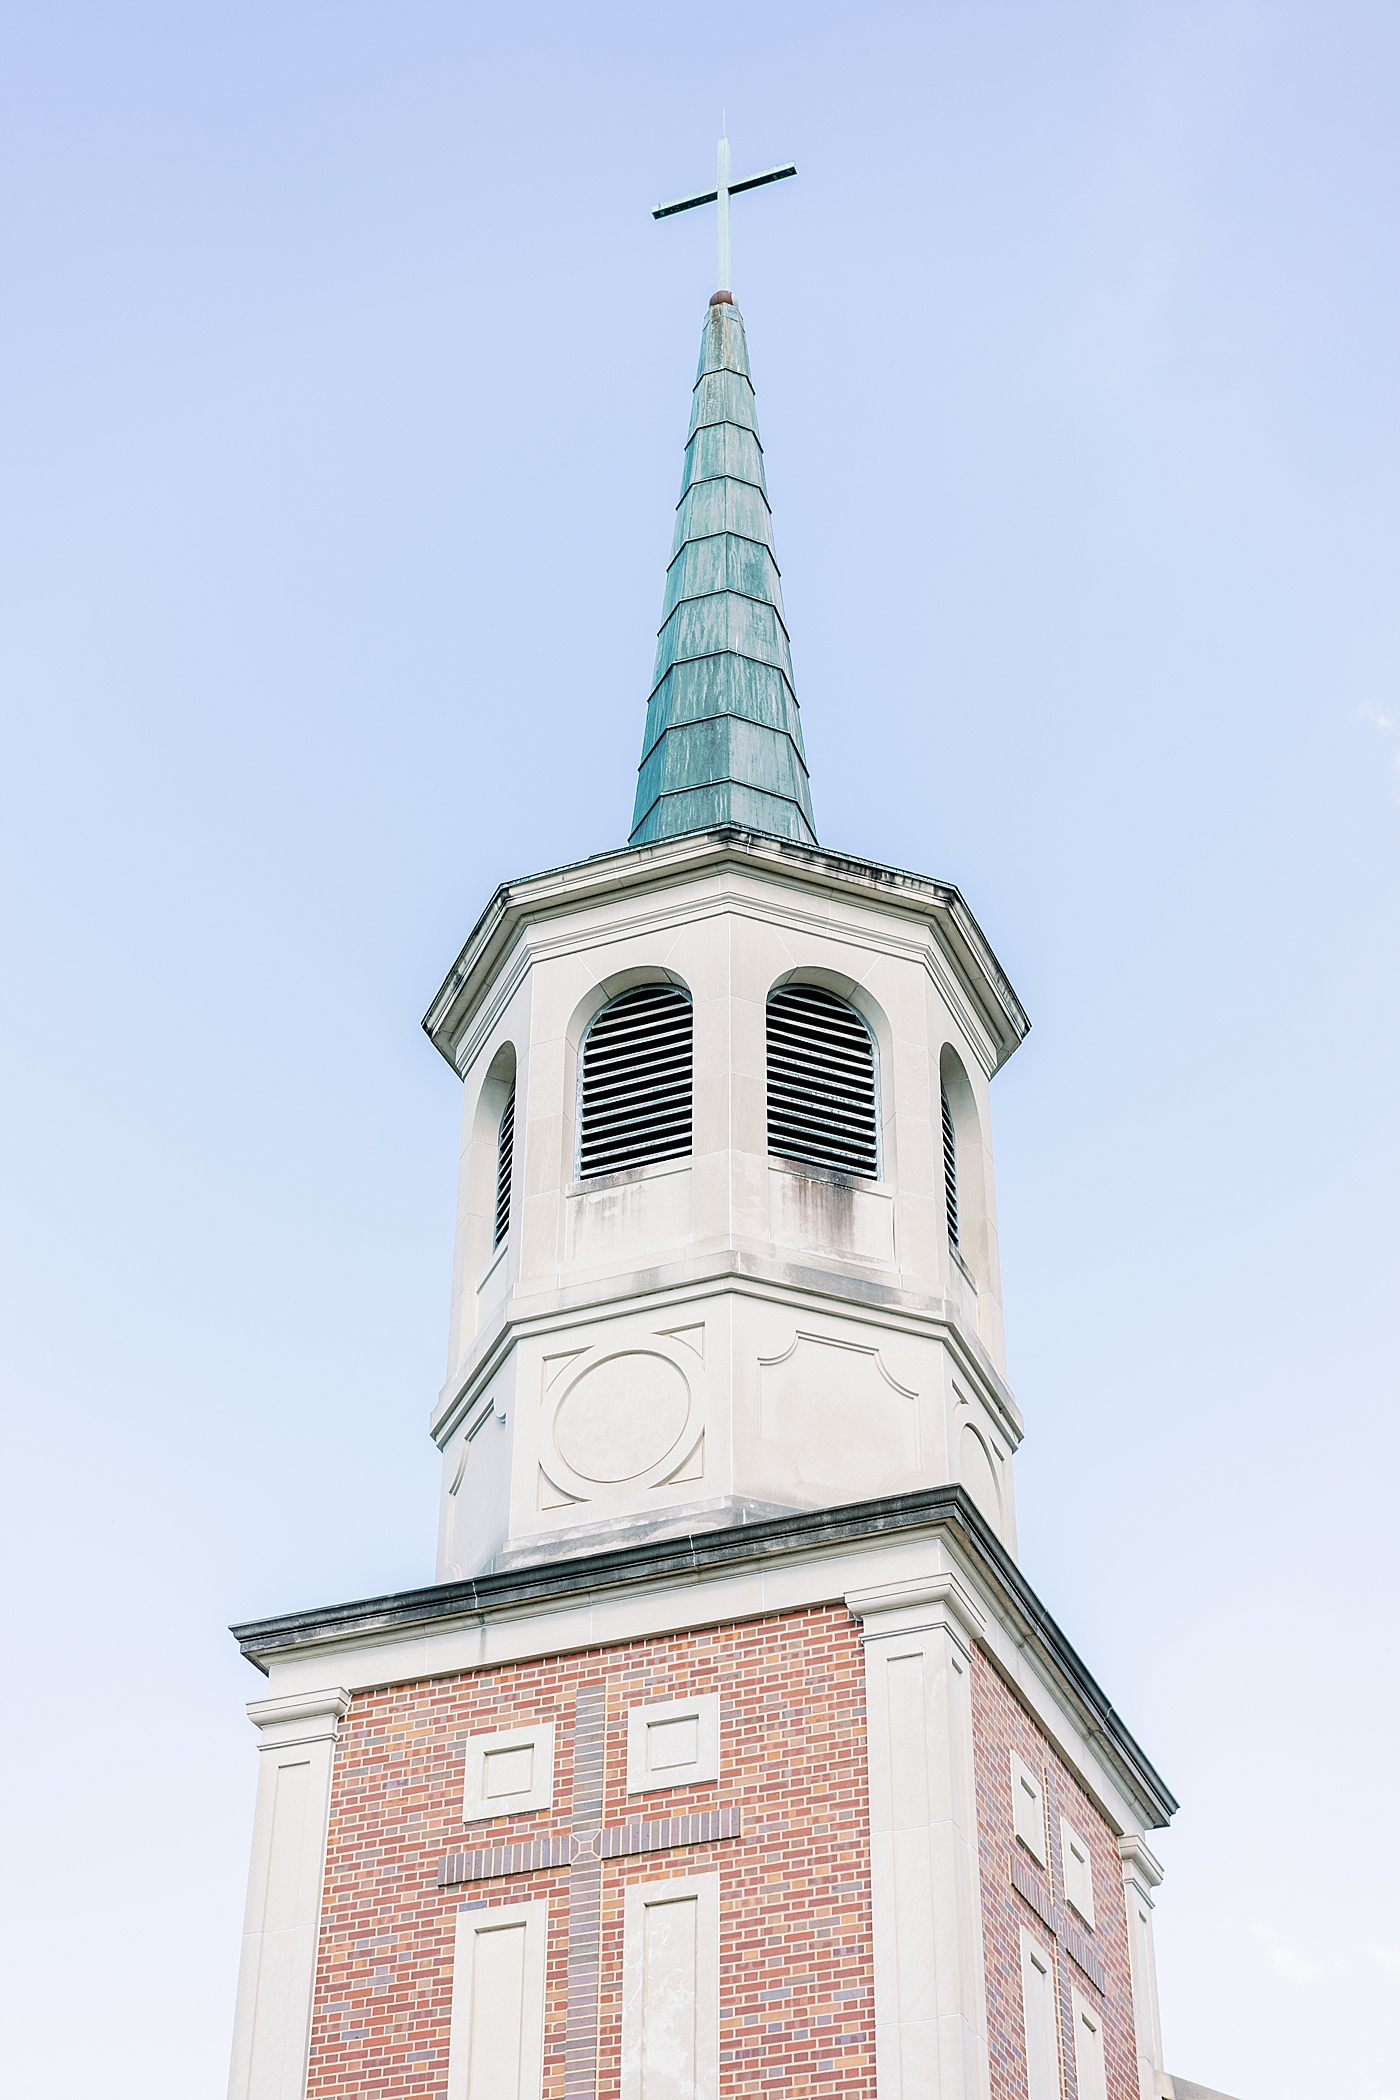 Church steeple with blue and brick | Image by Annie Laura Photo